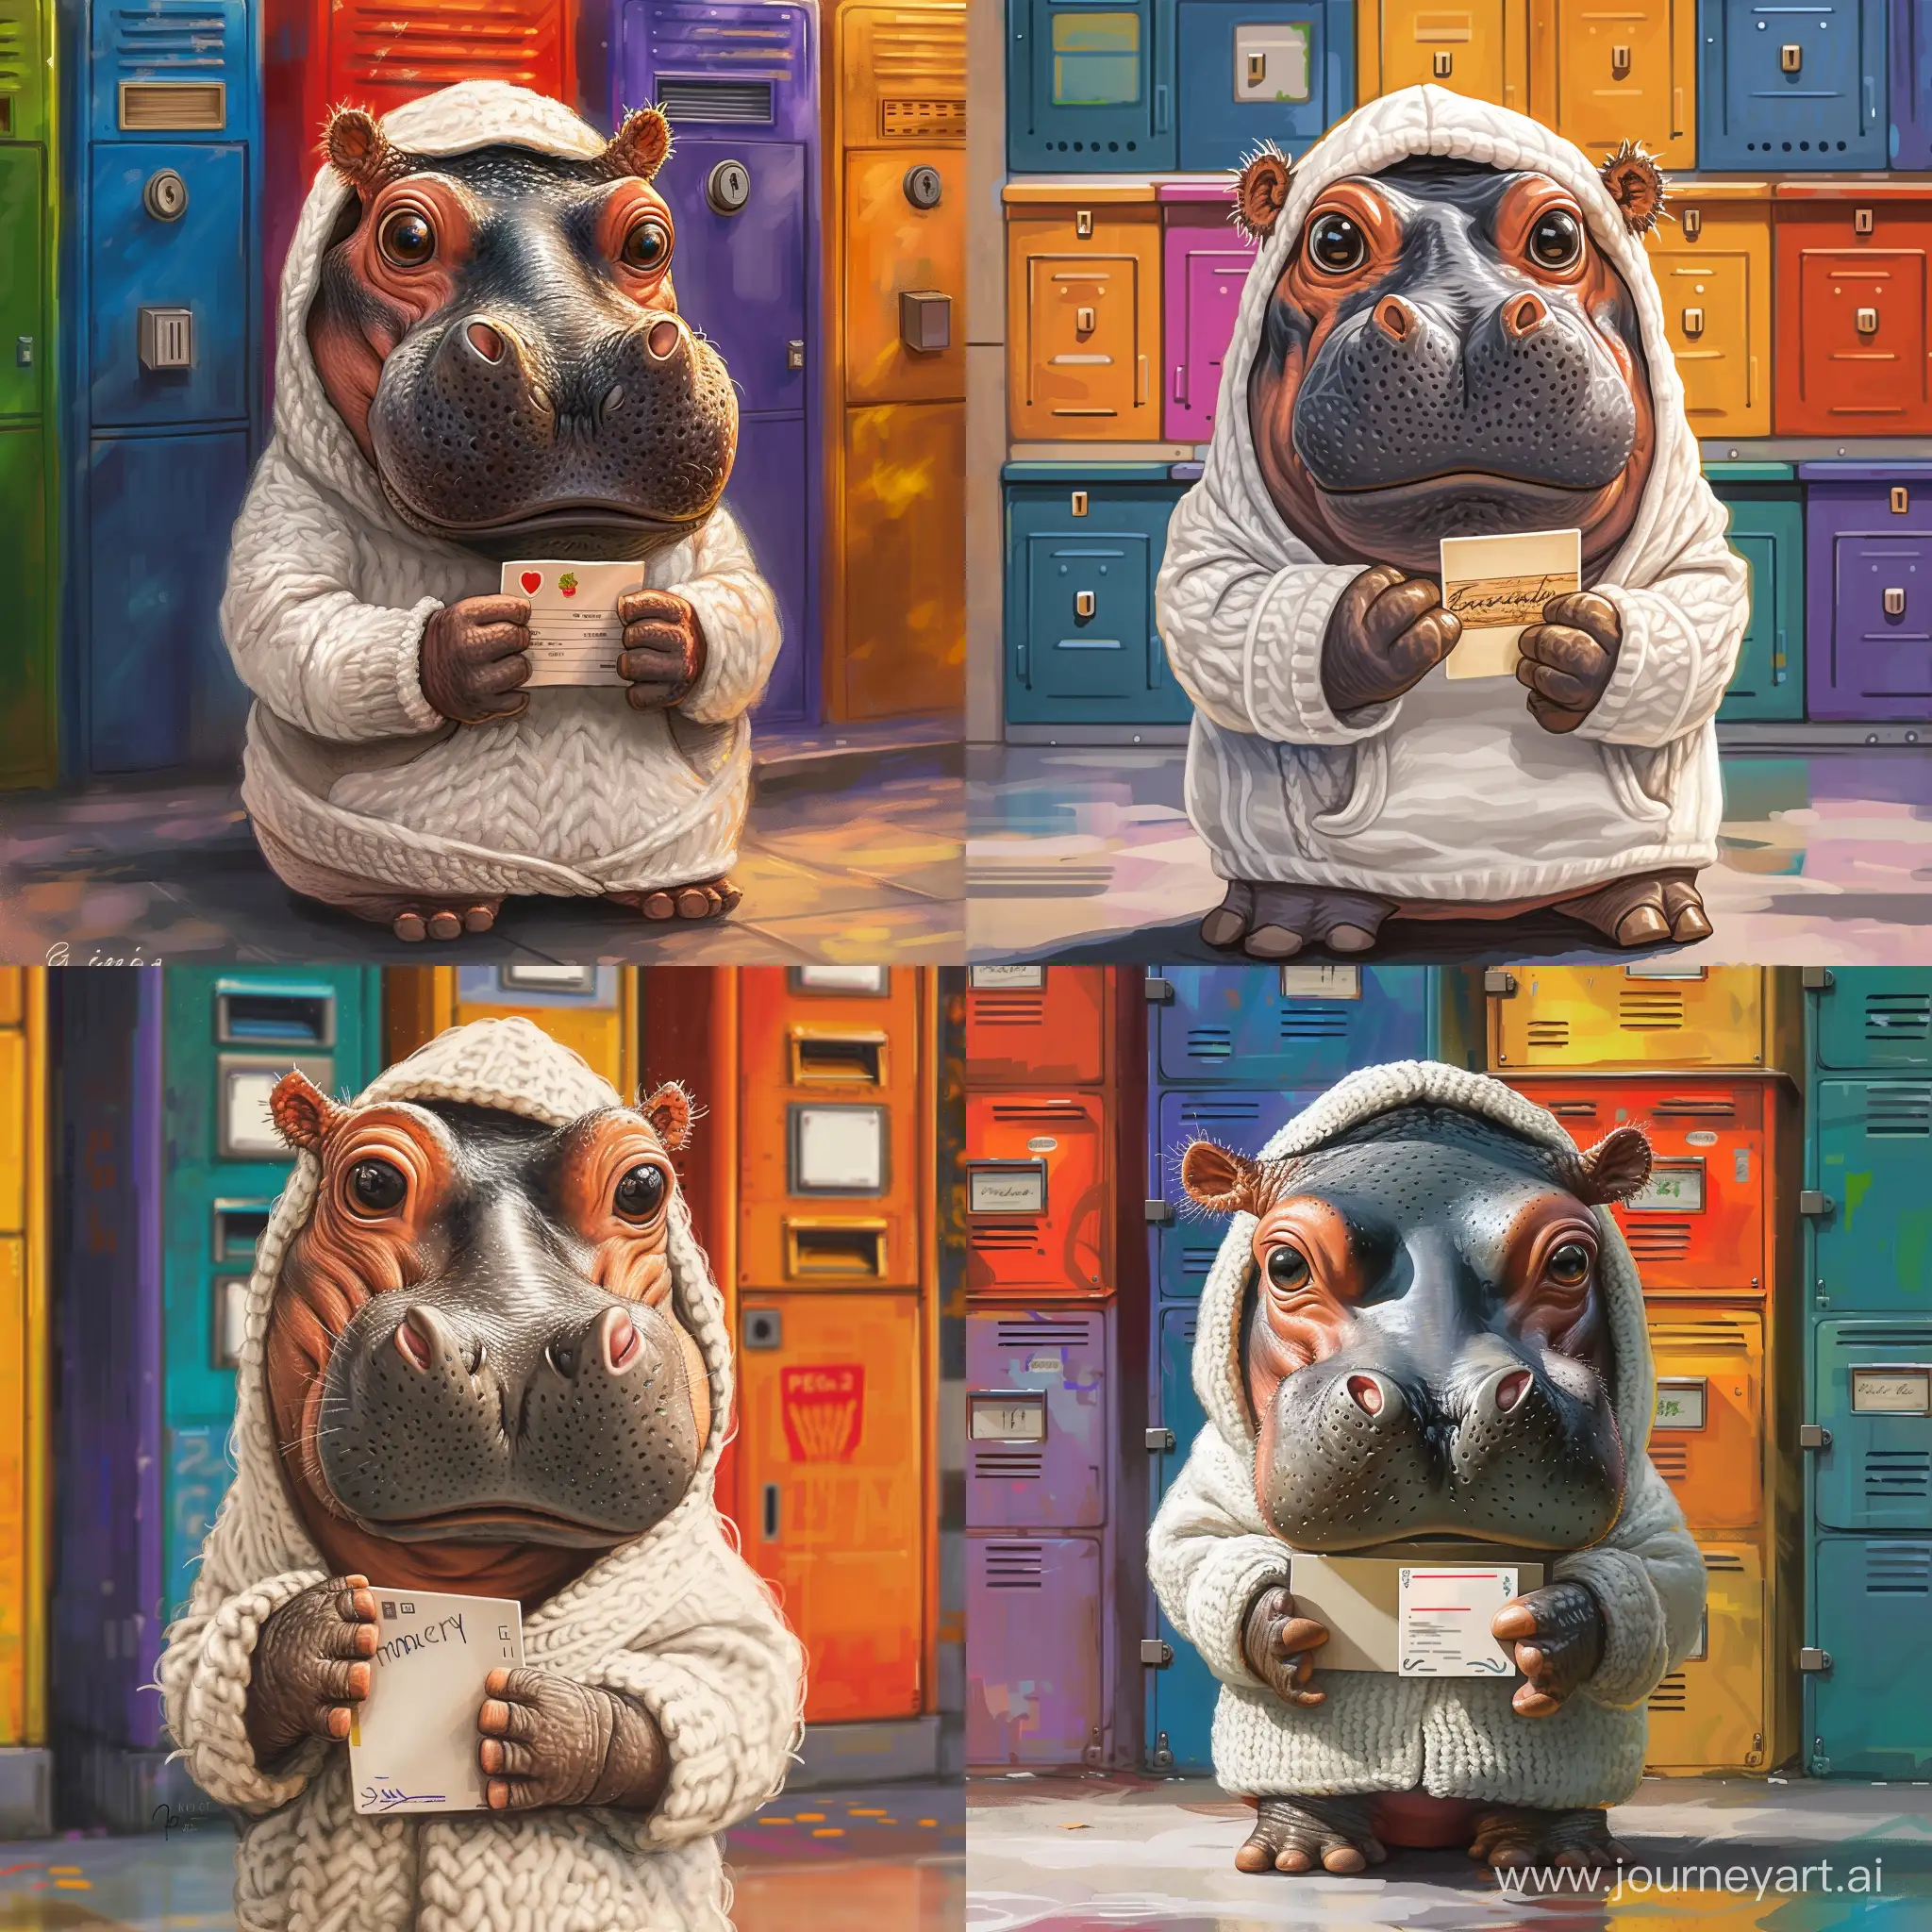 Charming-Baby-Hippopotamus-with-Postcard-in-Hand-and-Colorful-Mailboxes